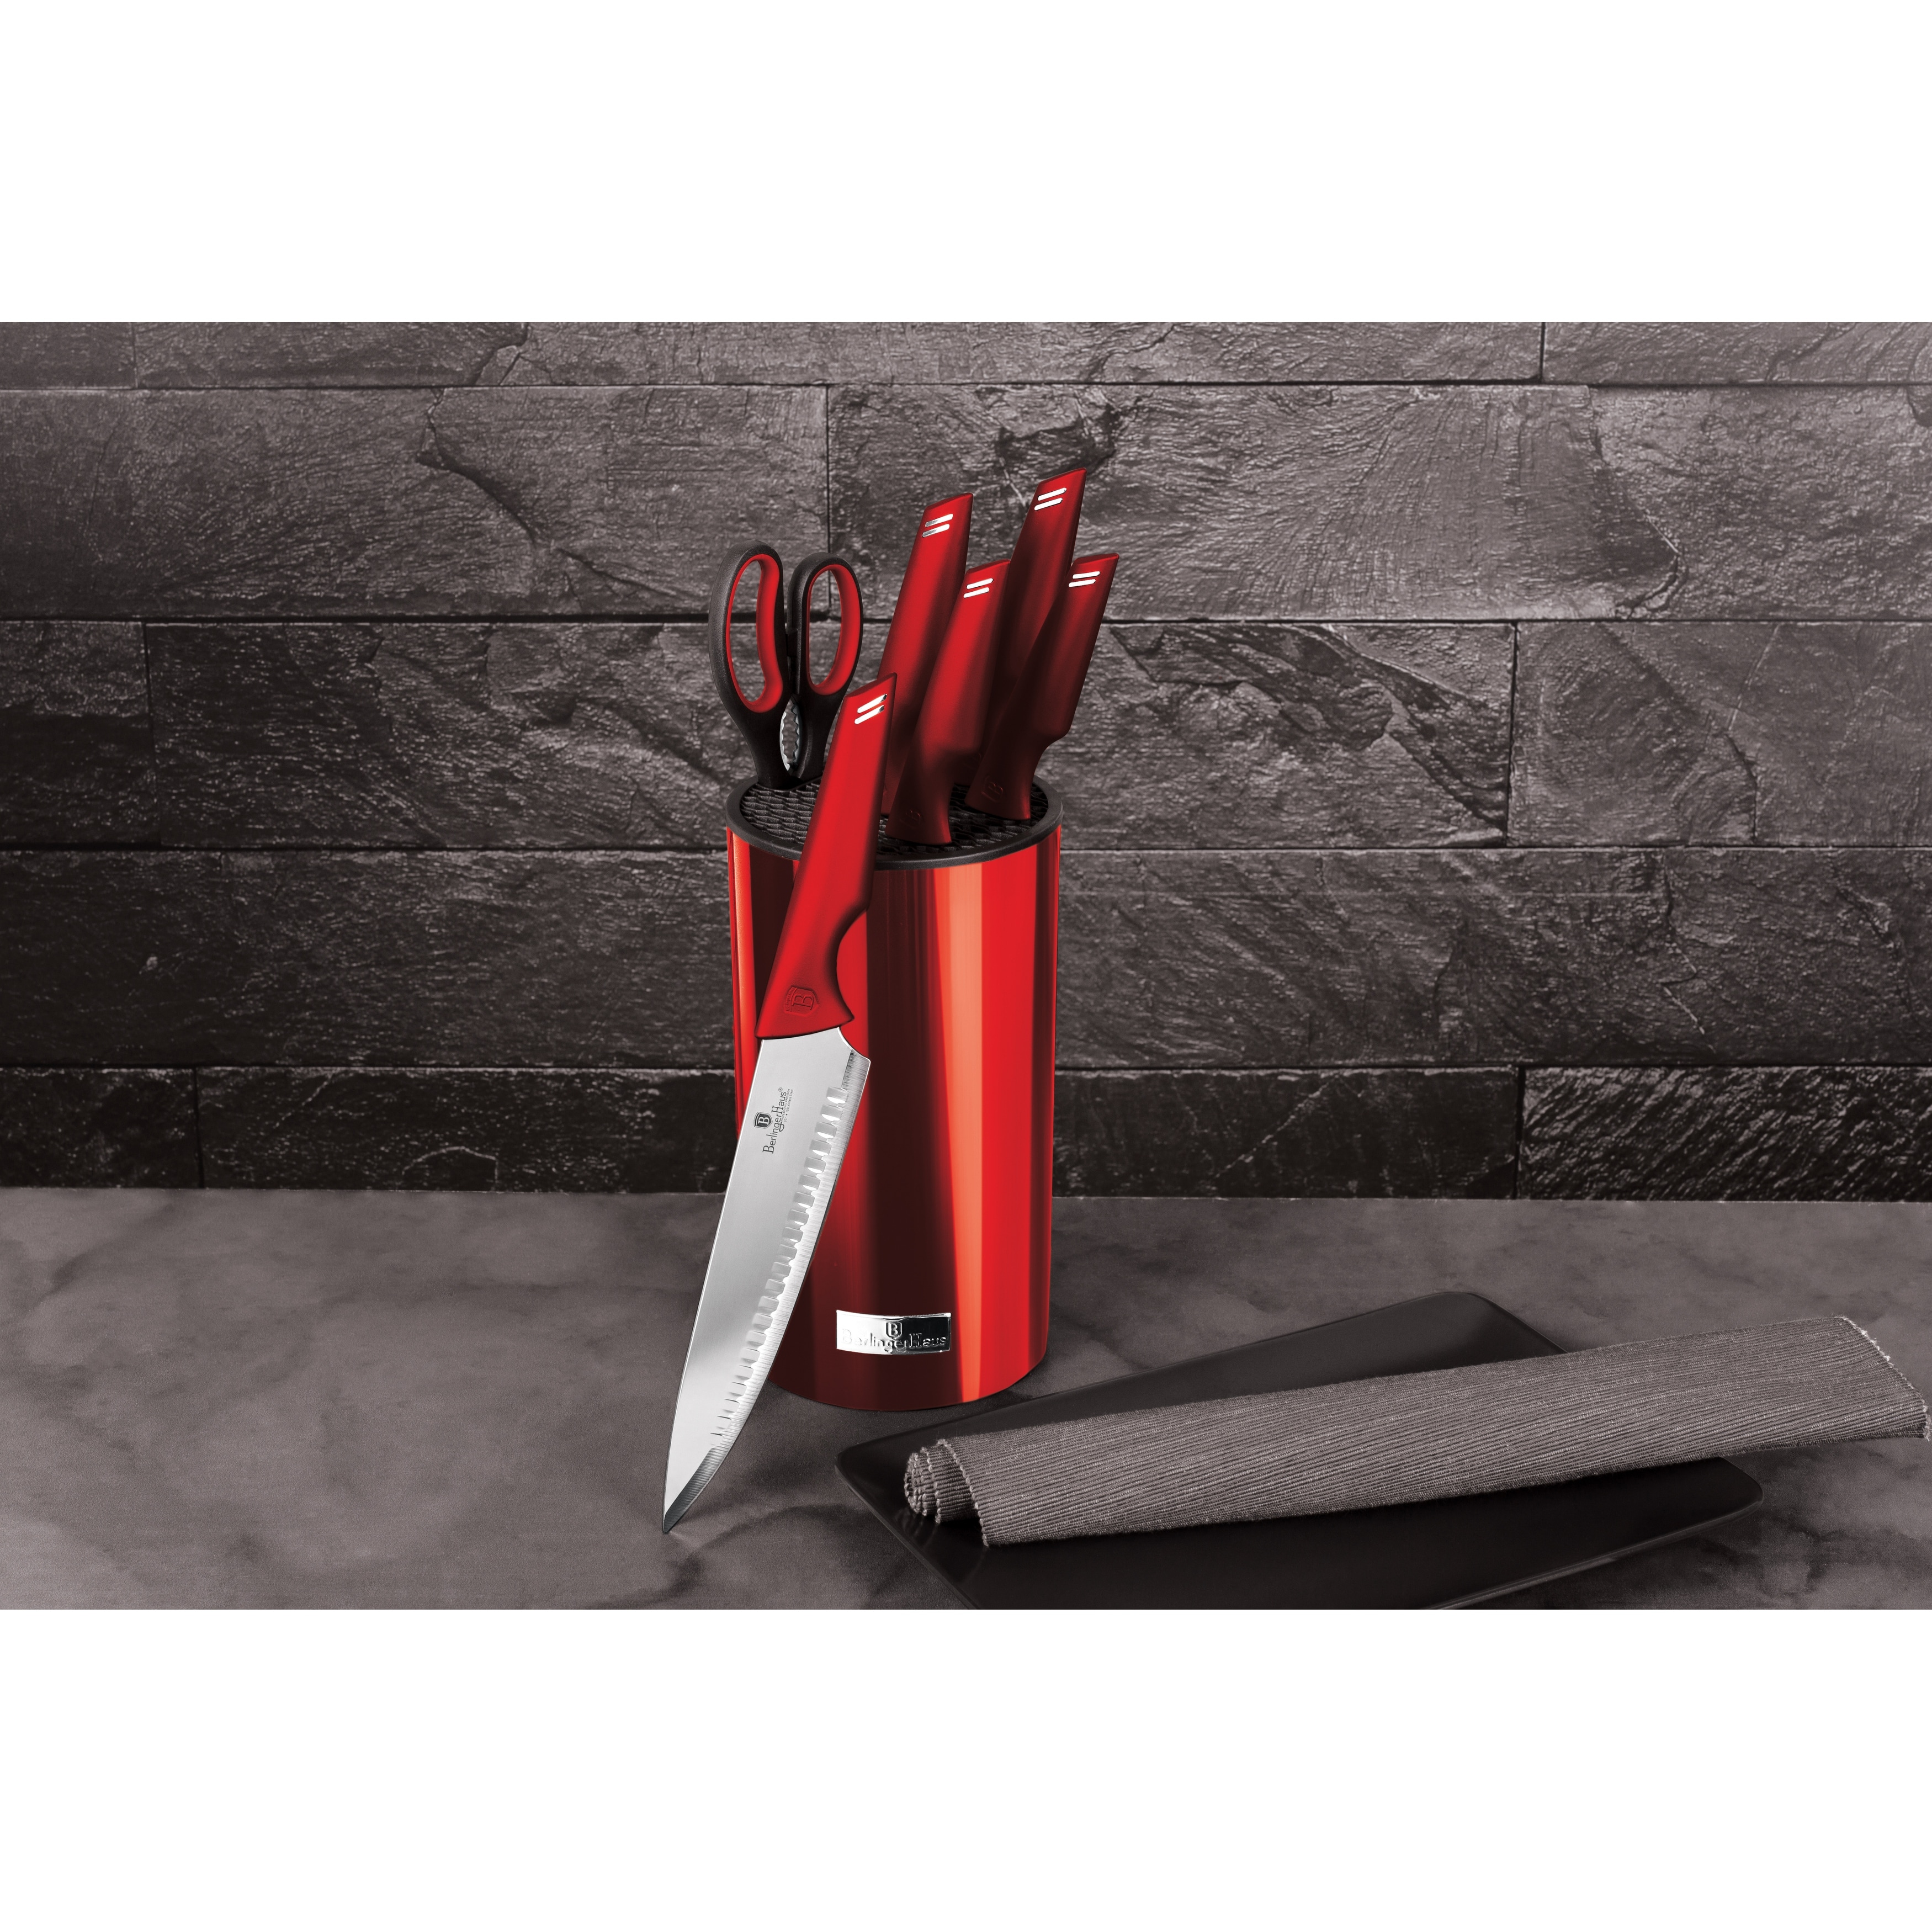 https://ak1.ostkcdn.com/images/products/is/images/direct/11464ad2a965860a82dbf4c4be7d2ccae3d47ce6/Berlinger-Haus-7-Piece-Knife-Set-with-Stainless-Steel-Stand-Burgundy.jpg